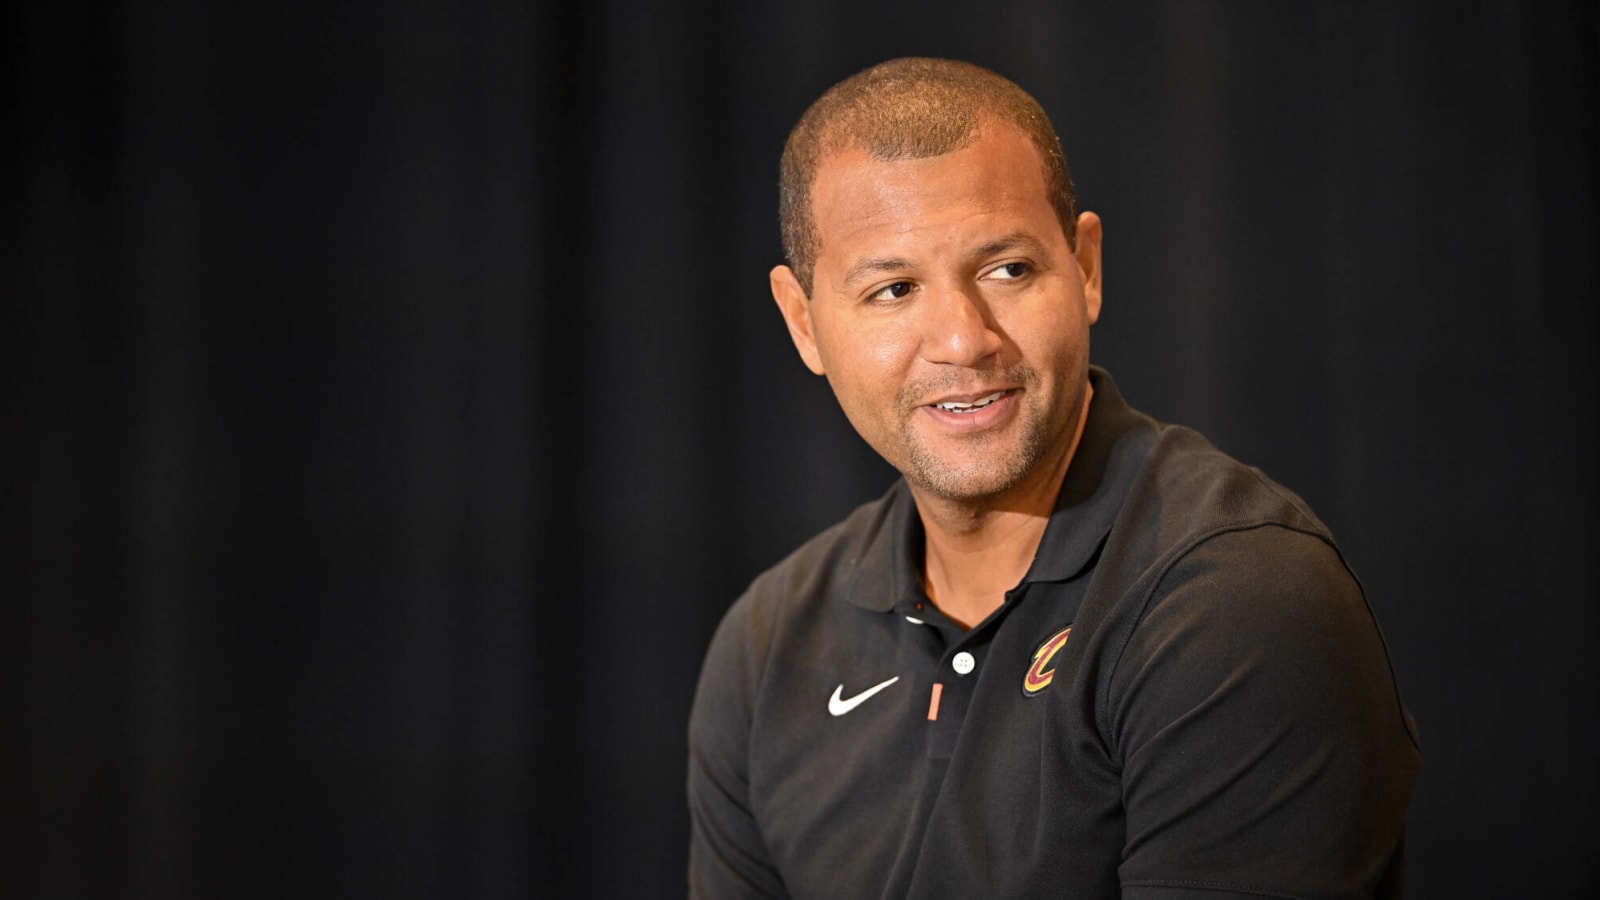 Cavaliers president Koby Altman charged with OVI